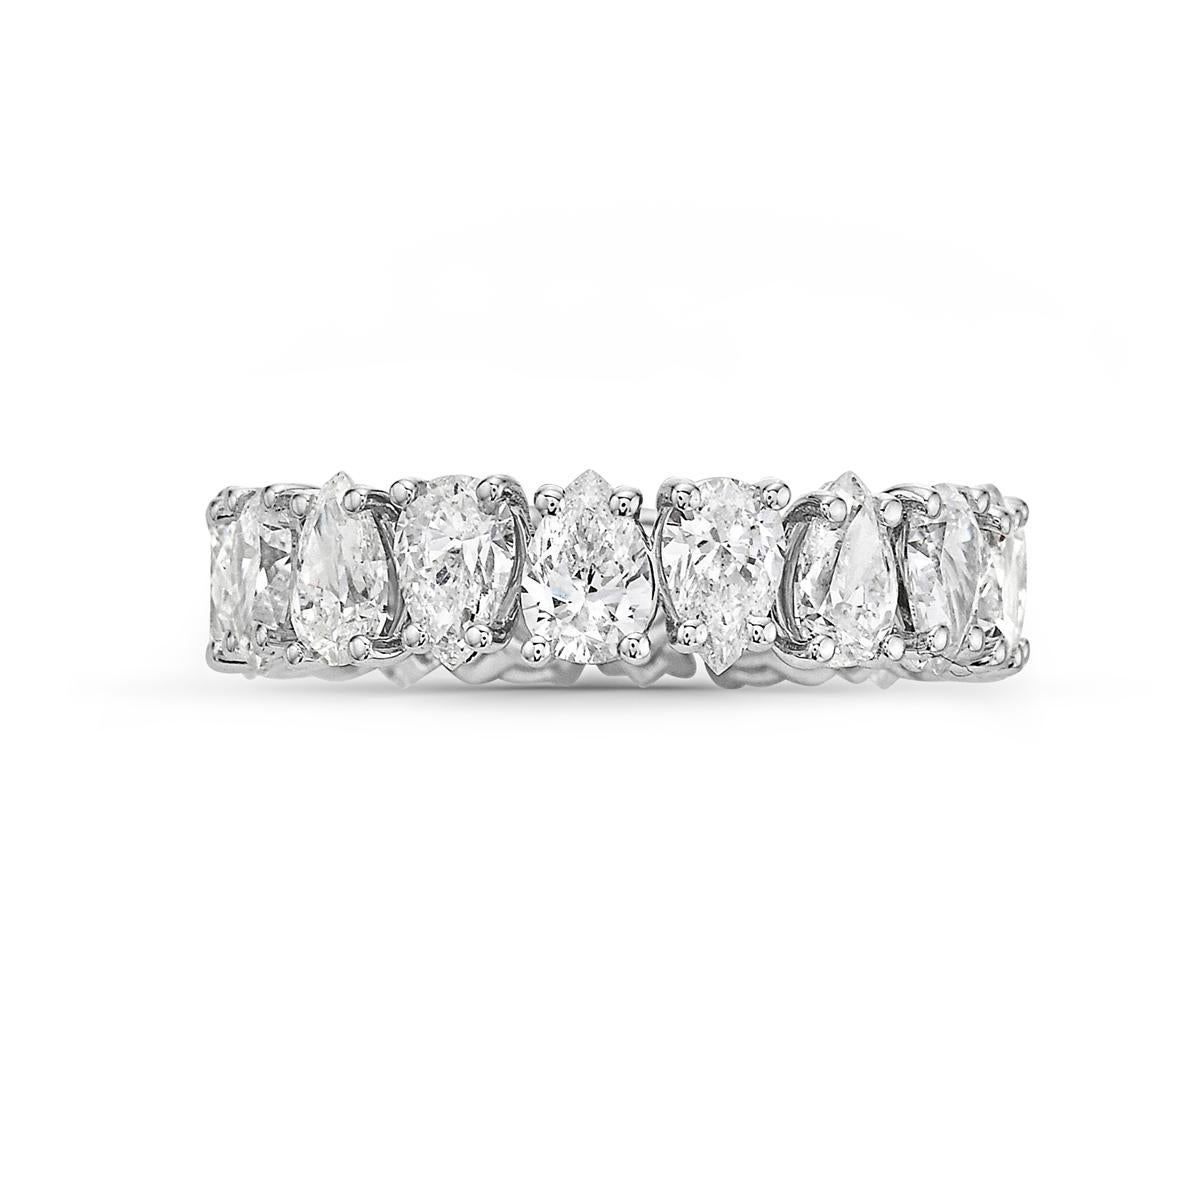 This diamond eternity band features 20 pear shape F VVS diamonds weighing approximately 4.84 carats set in 18k white gold. Size 7. 